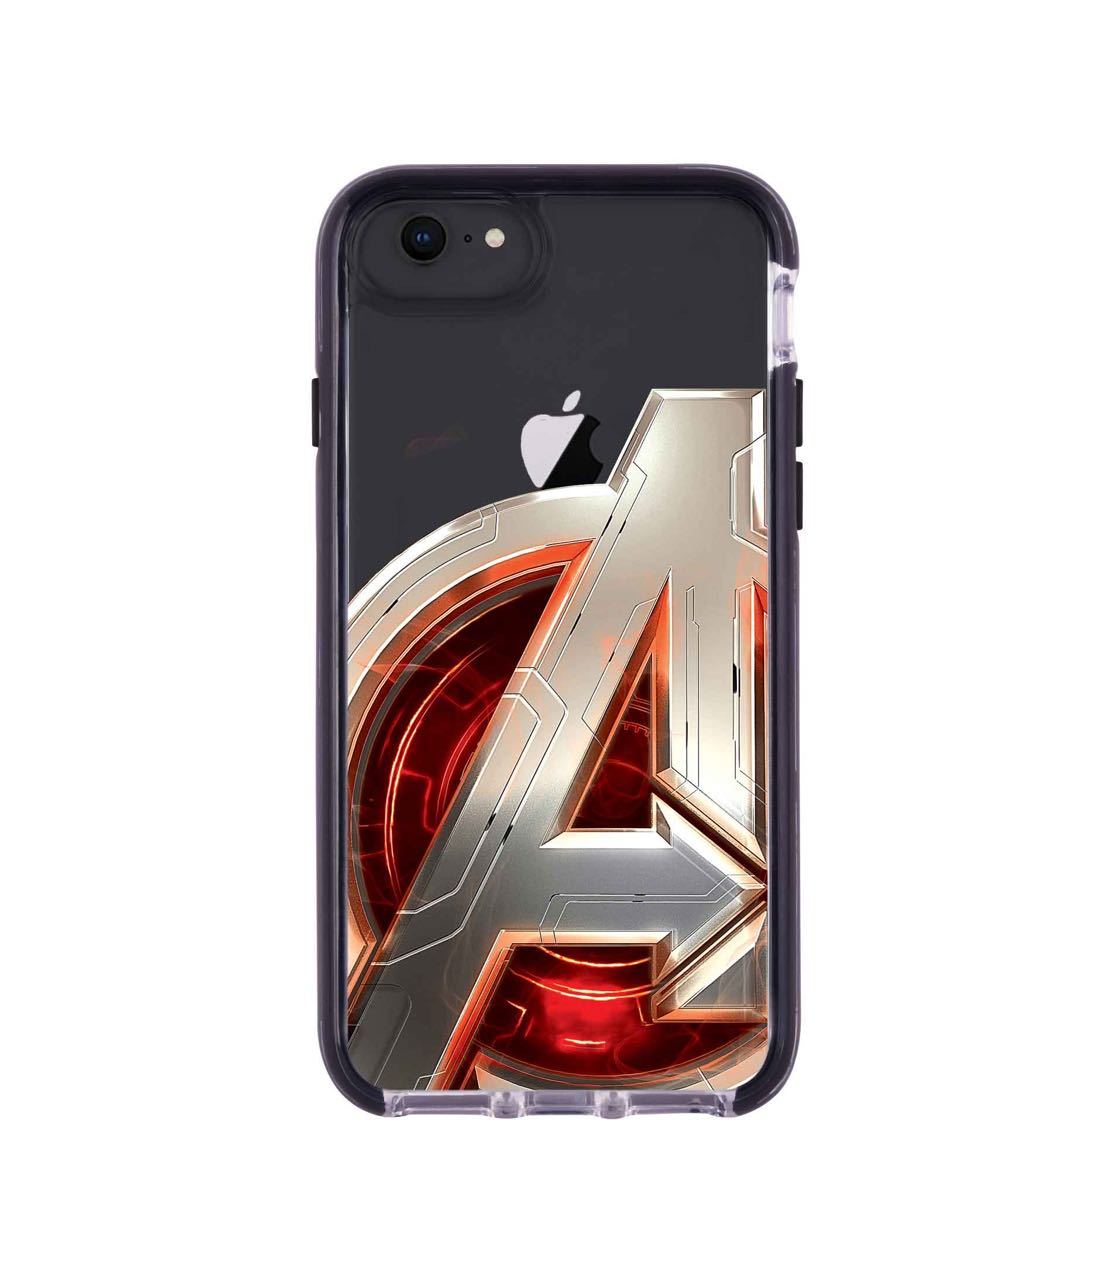 Avengers Version 2 - Extreme Phone Case for iPhone 8